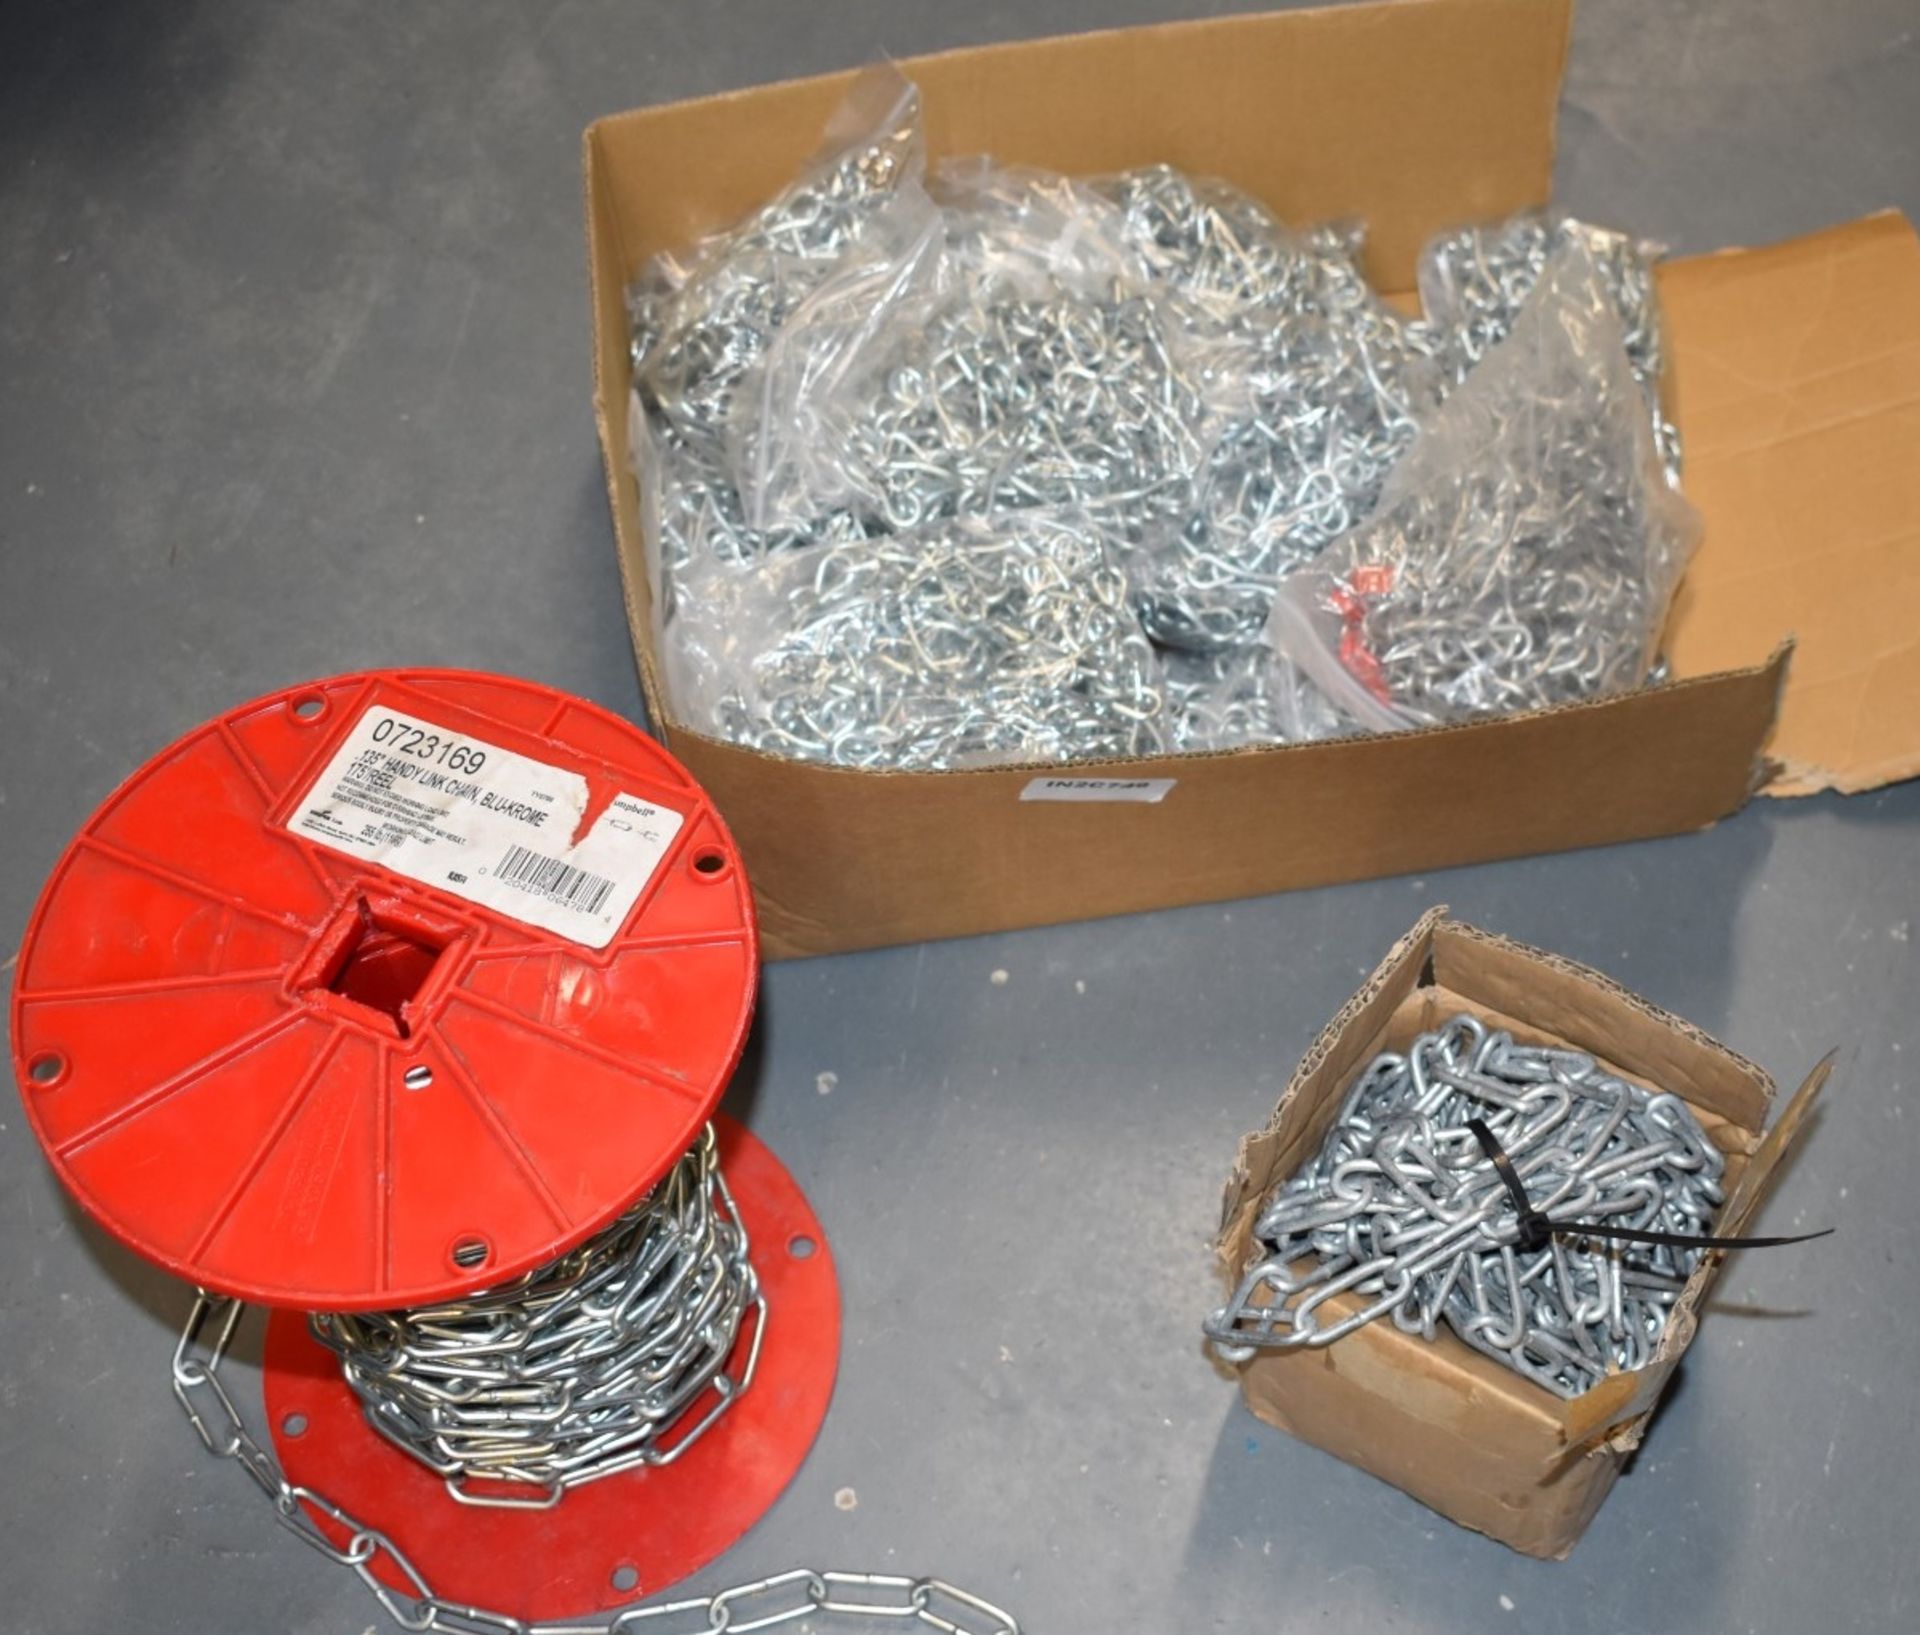 1 x Assorted Lot of Link Chain - Includes 175' Link Chain Reel, 20 Bags of Chain and Box of Chain - Image 2 of 9